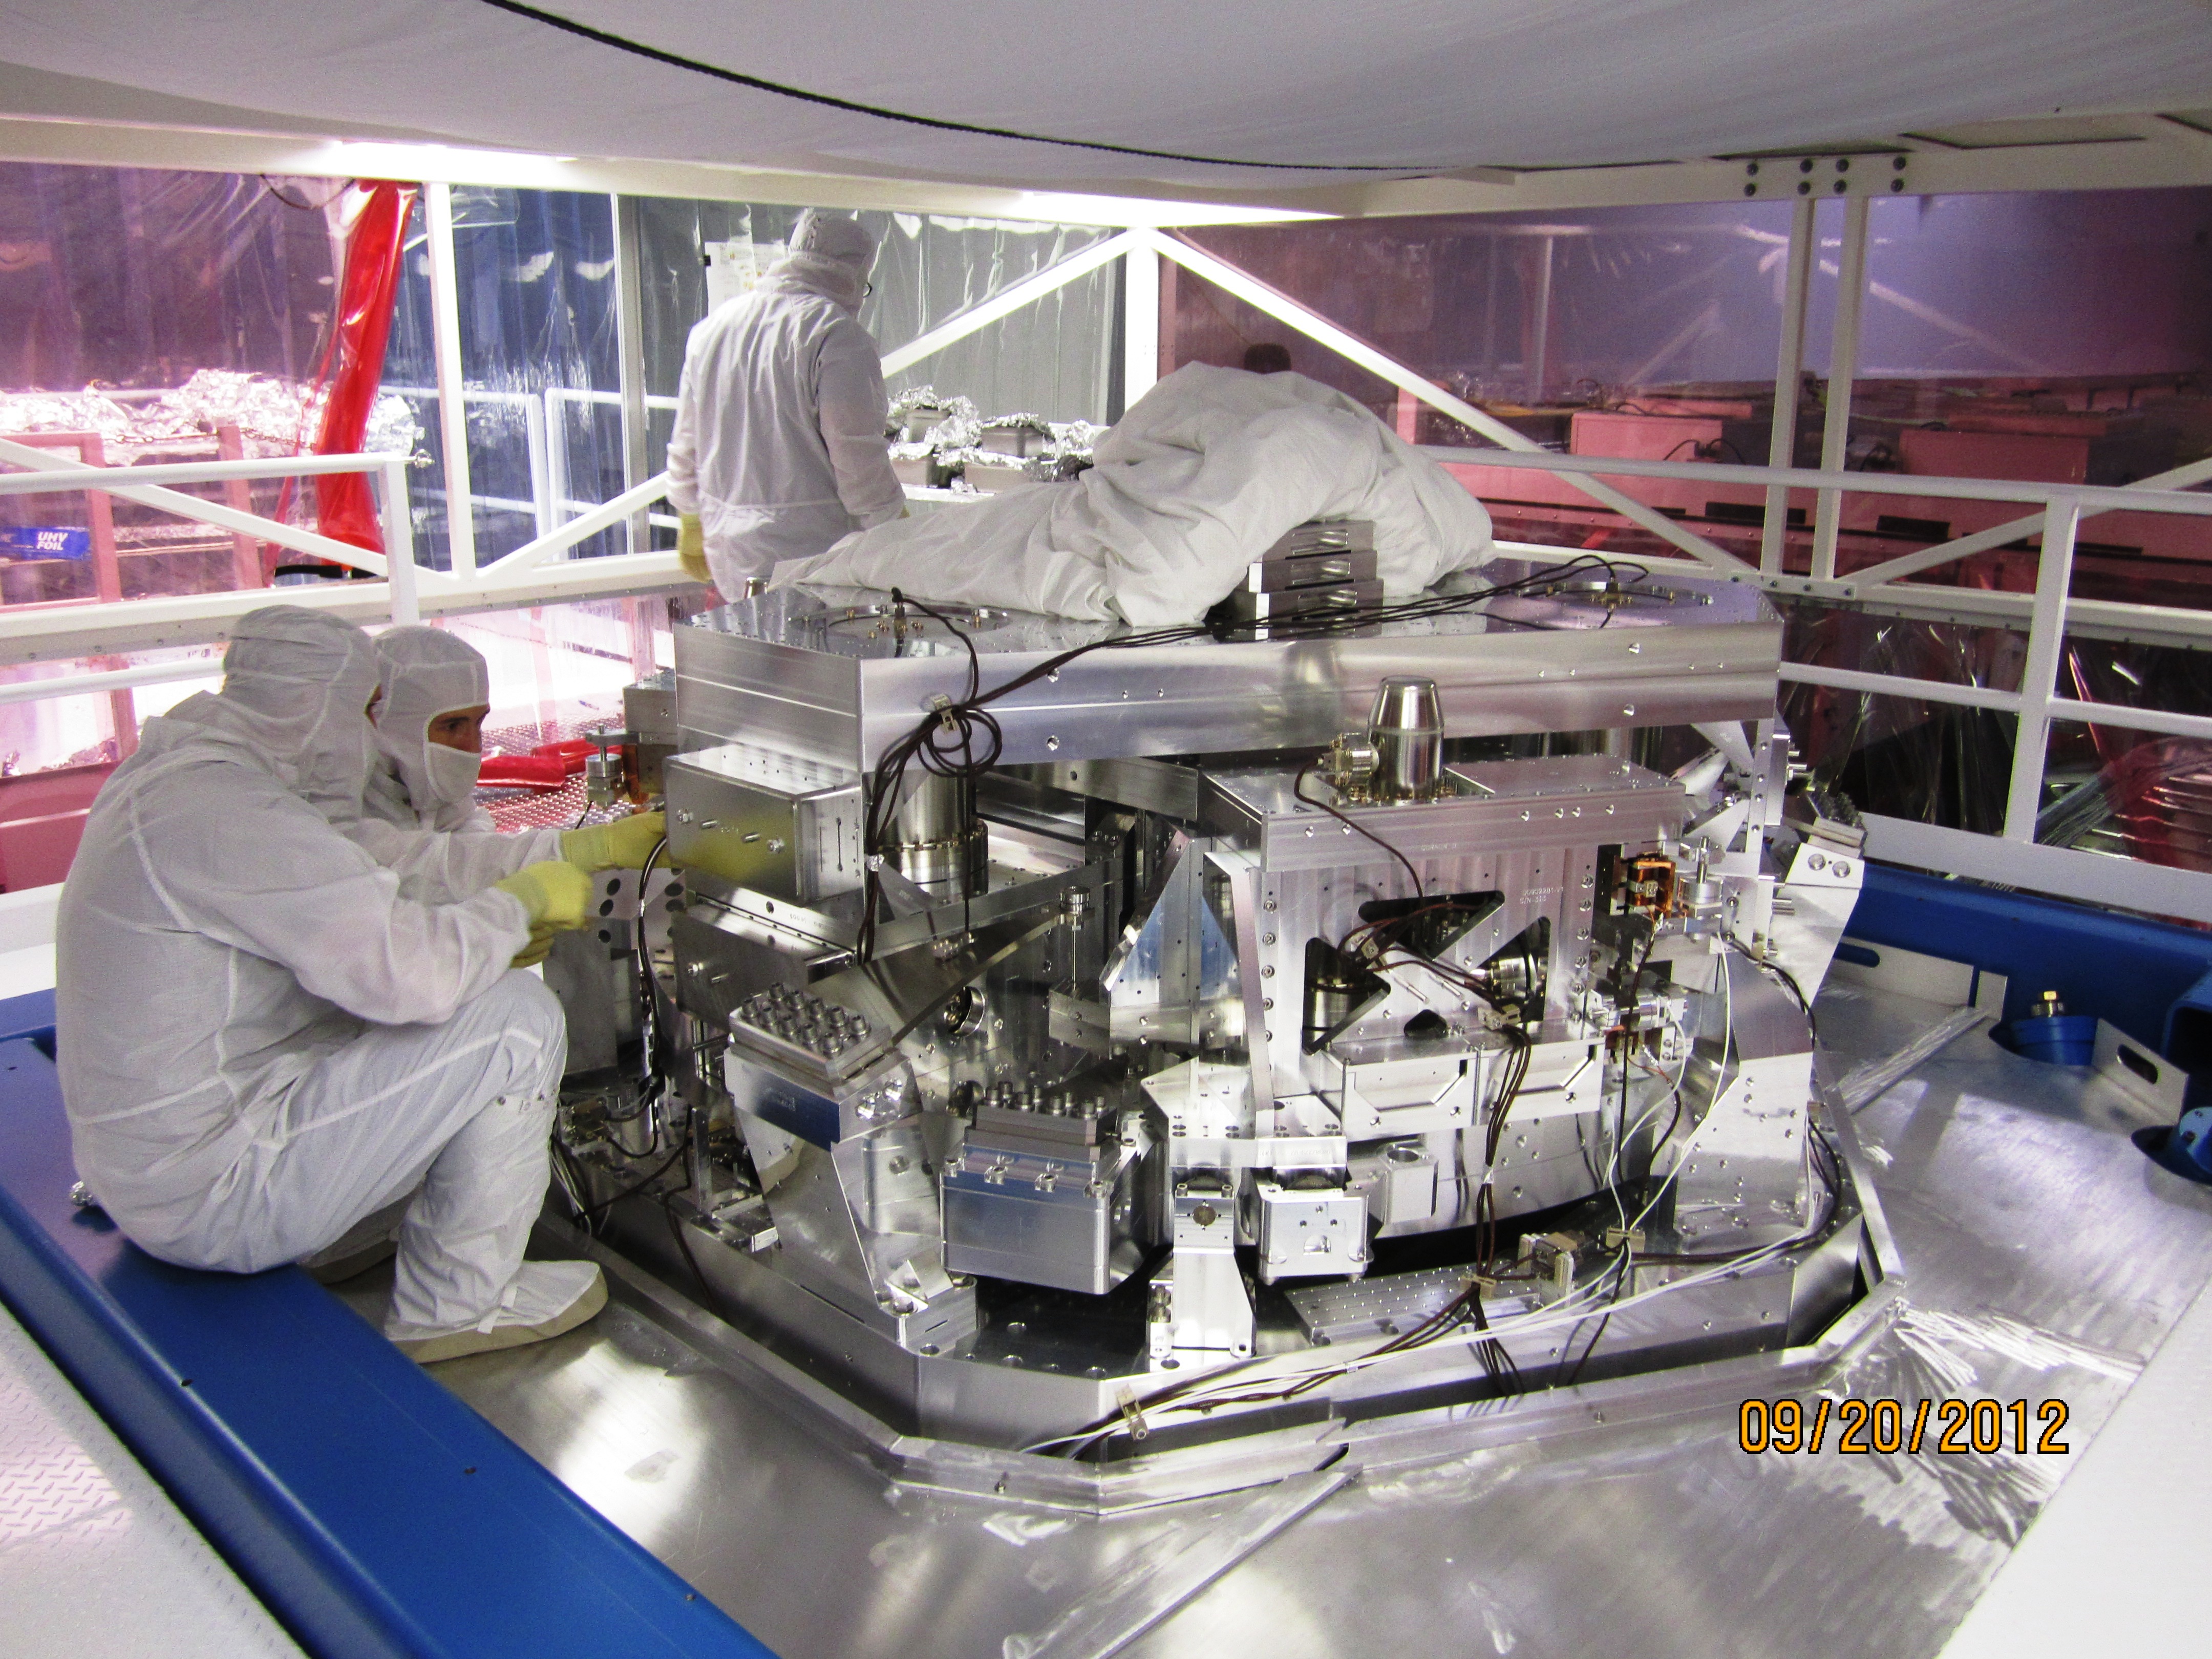 Workers in Livingston, Louisiana are shown installing equipment used to split a powerful laser into two beams, each one traveling down a different arm of the LIGO observatory. The beams bounce off a mirror at the end of each arm and return to the center exactly out of phase, cancelling out the energies of each. (Credit: LIGO Scientific Collaboration)